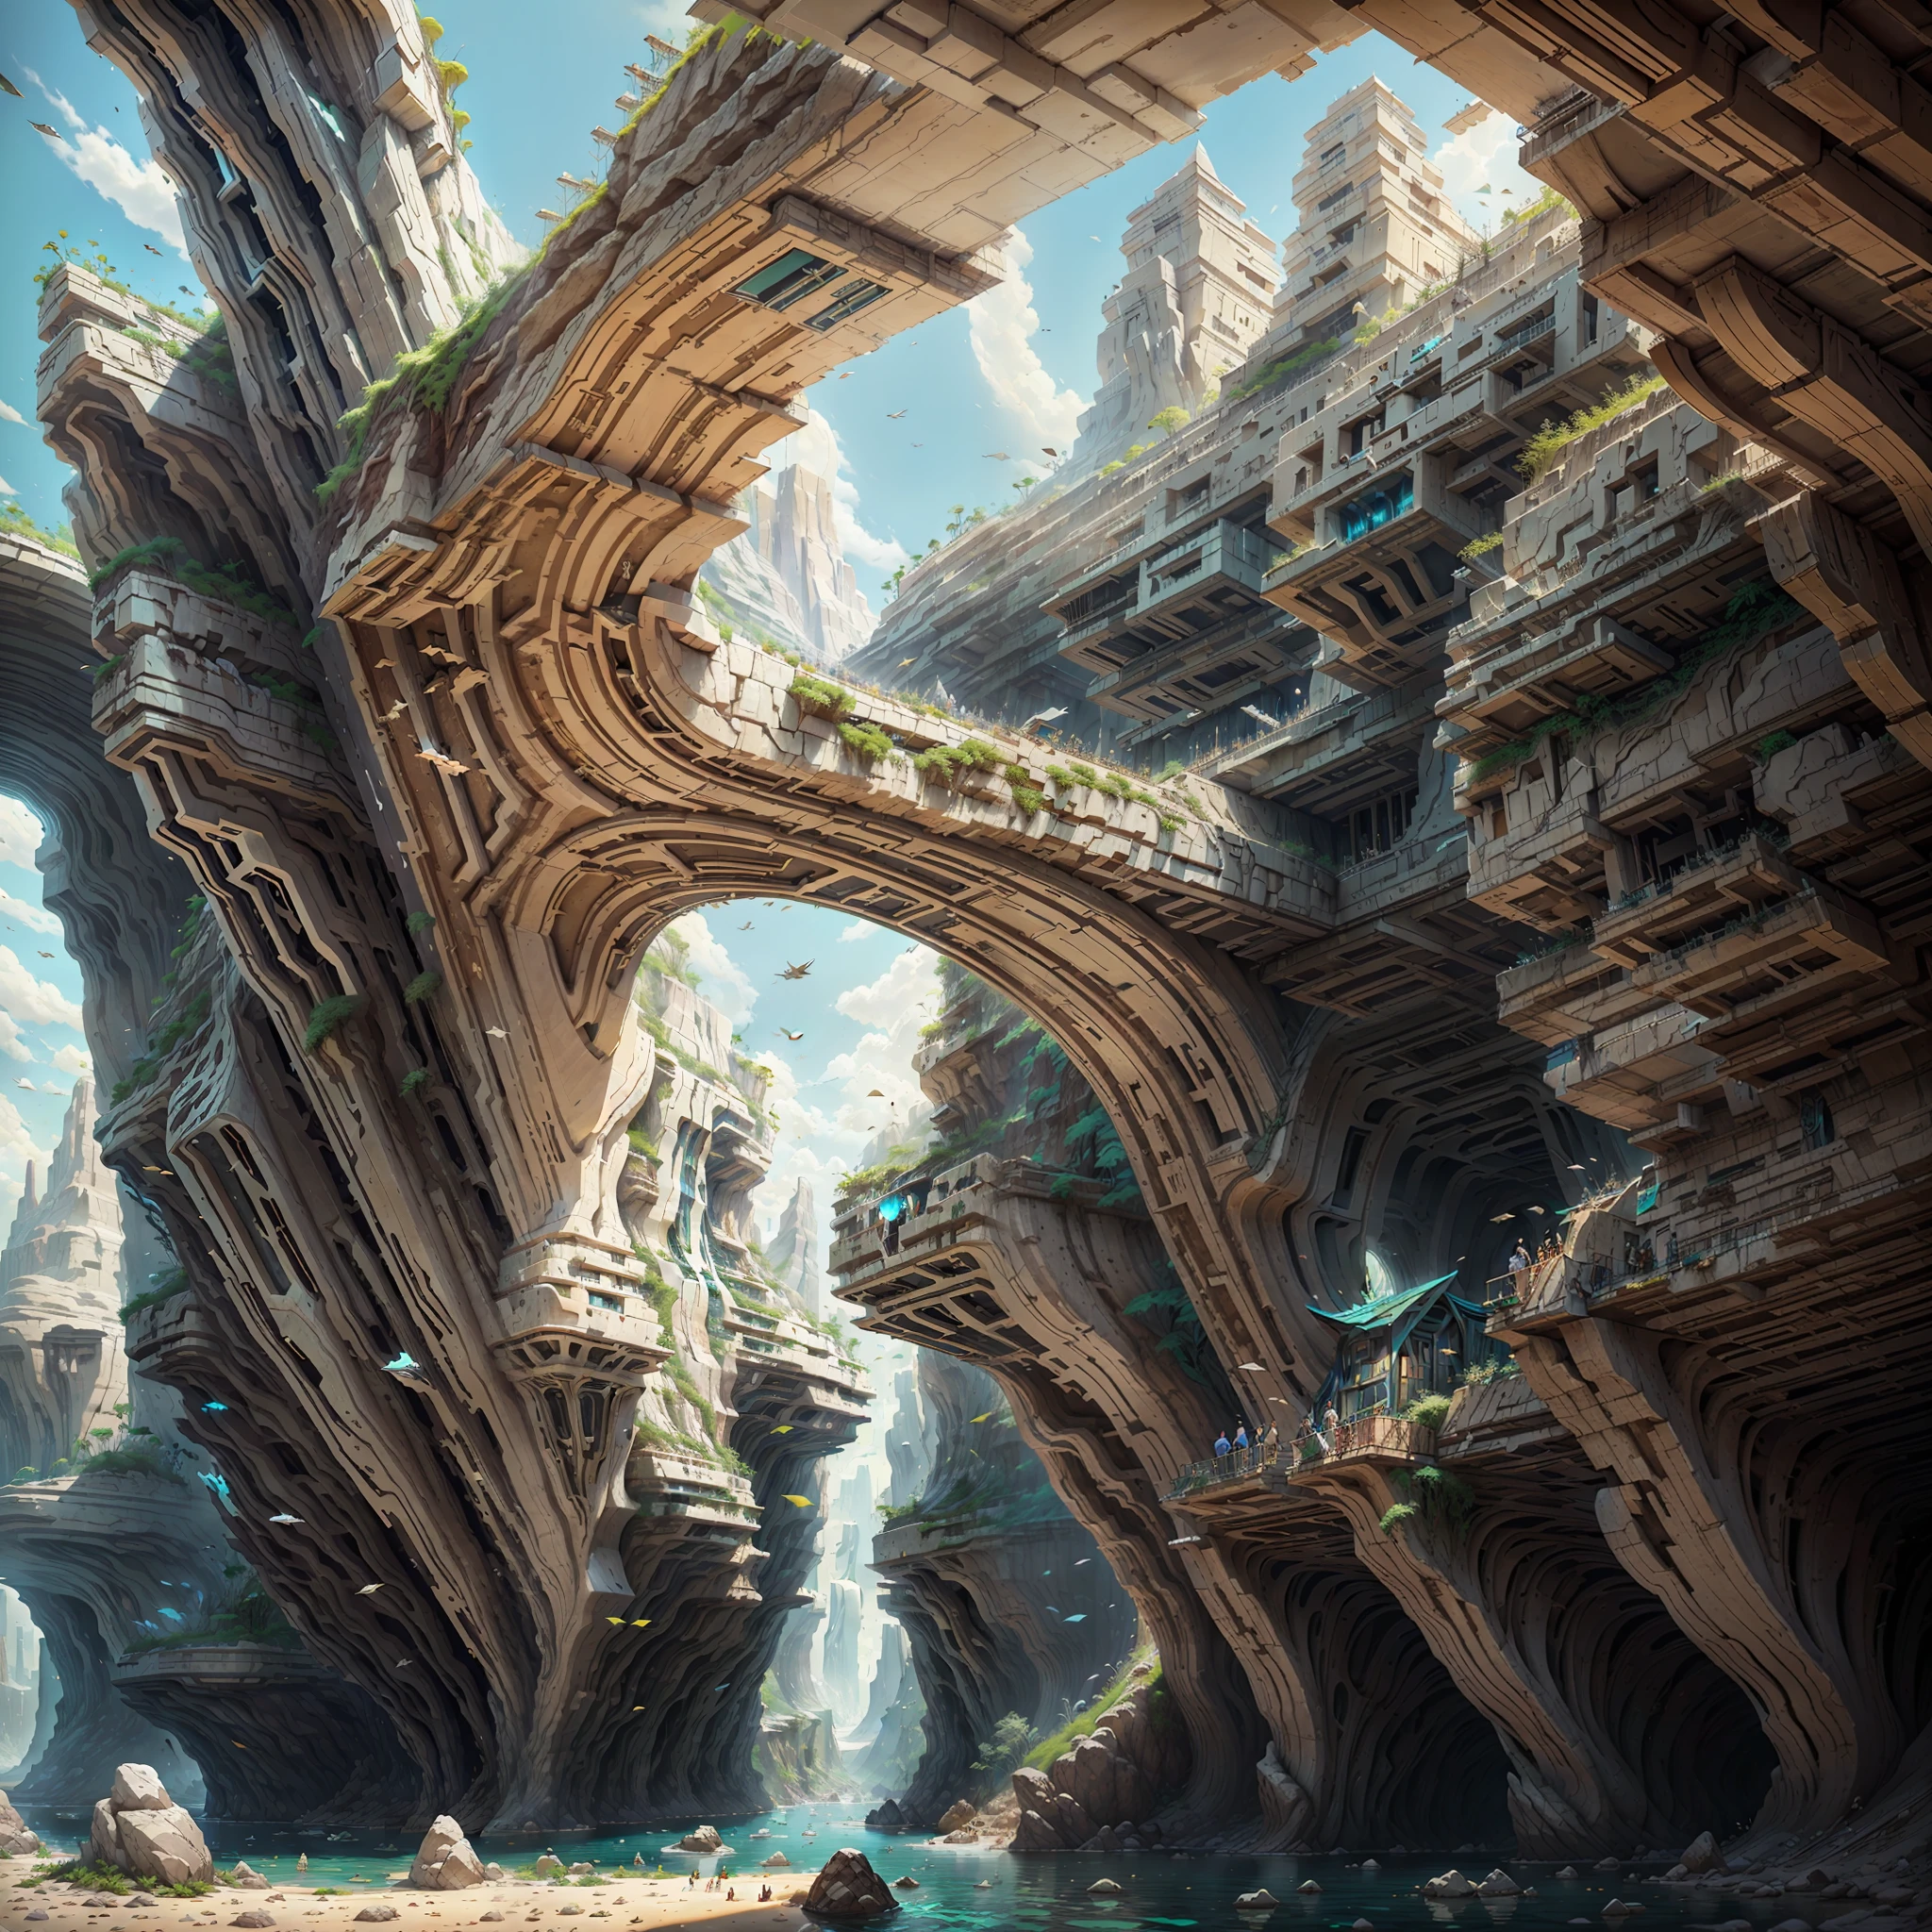 :an awesome sunny cheerful day environment concept art of Futuristic design of cave architecture interiors concept art on grand Canyon caves nature architecture, Proportional,Detailed, Cave architecture naturally meets futuristic architecture，Boasting huge waterfalls on rainforest jungle cliffs,Crepuscular Rays, nature meets modern architecture in the style of Aries Moross, Rem Koolhaas,Daniel Libeskind, Jean Nouvel, Paolo Soleri,Toyo Ito and Philip Johnson with Dry brush drawing style ,Chiaroscuro village,cliff side residential area, mixed development,nature architecture,Bright colors,high rise made up staircases, terrazzo, full of glass facades,carved from rocks, Masterpiece, Proportional, Detailed, trending on artstationh, Beautiful lighting, Realistic, Intricate